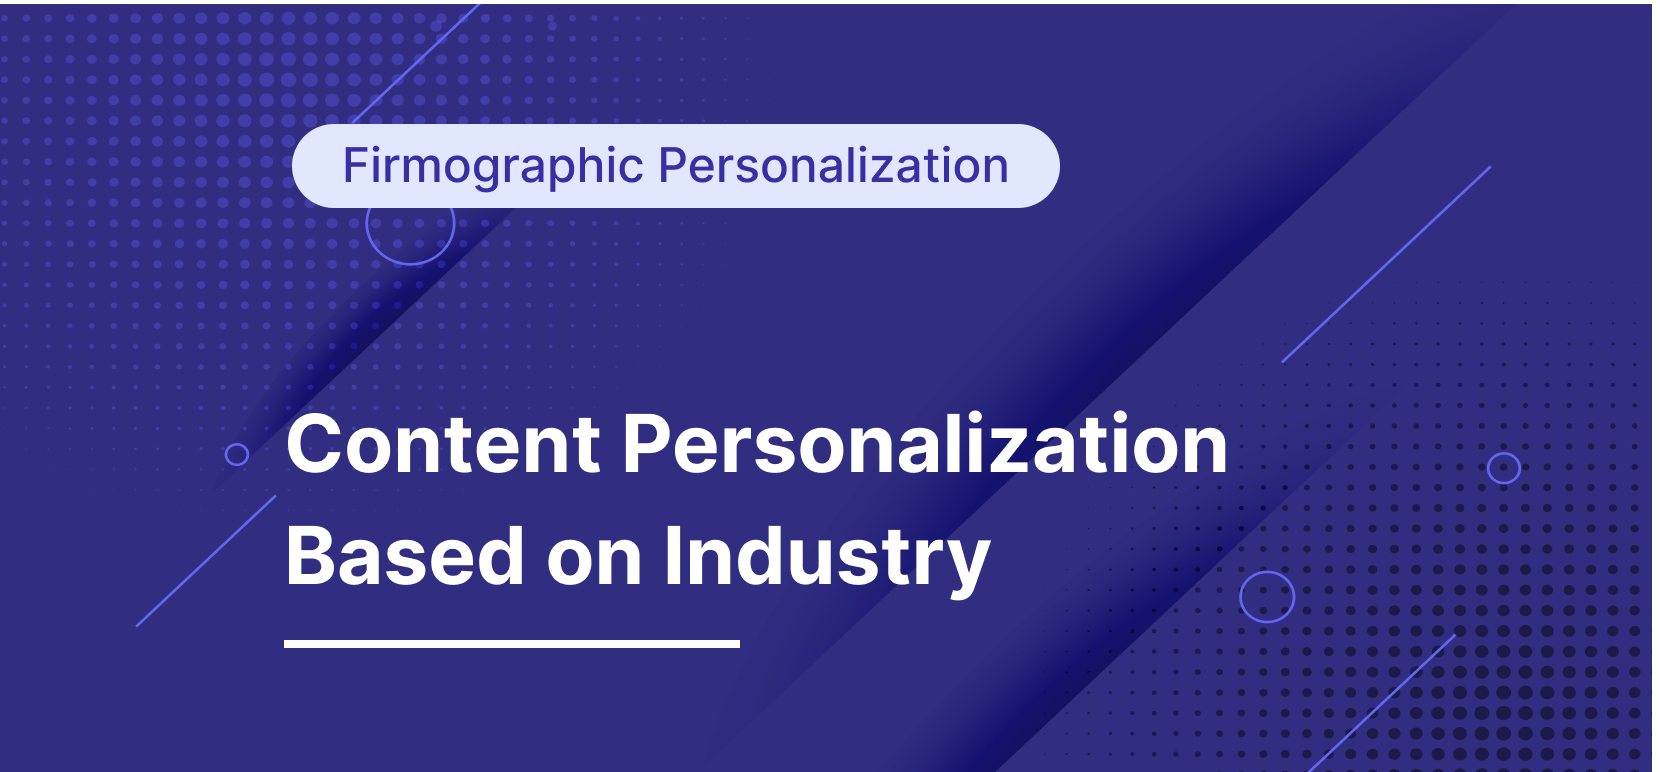 How to Personalize Your Website Content Based on Industry